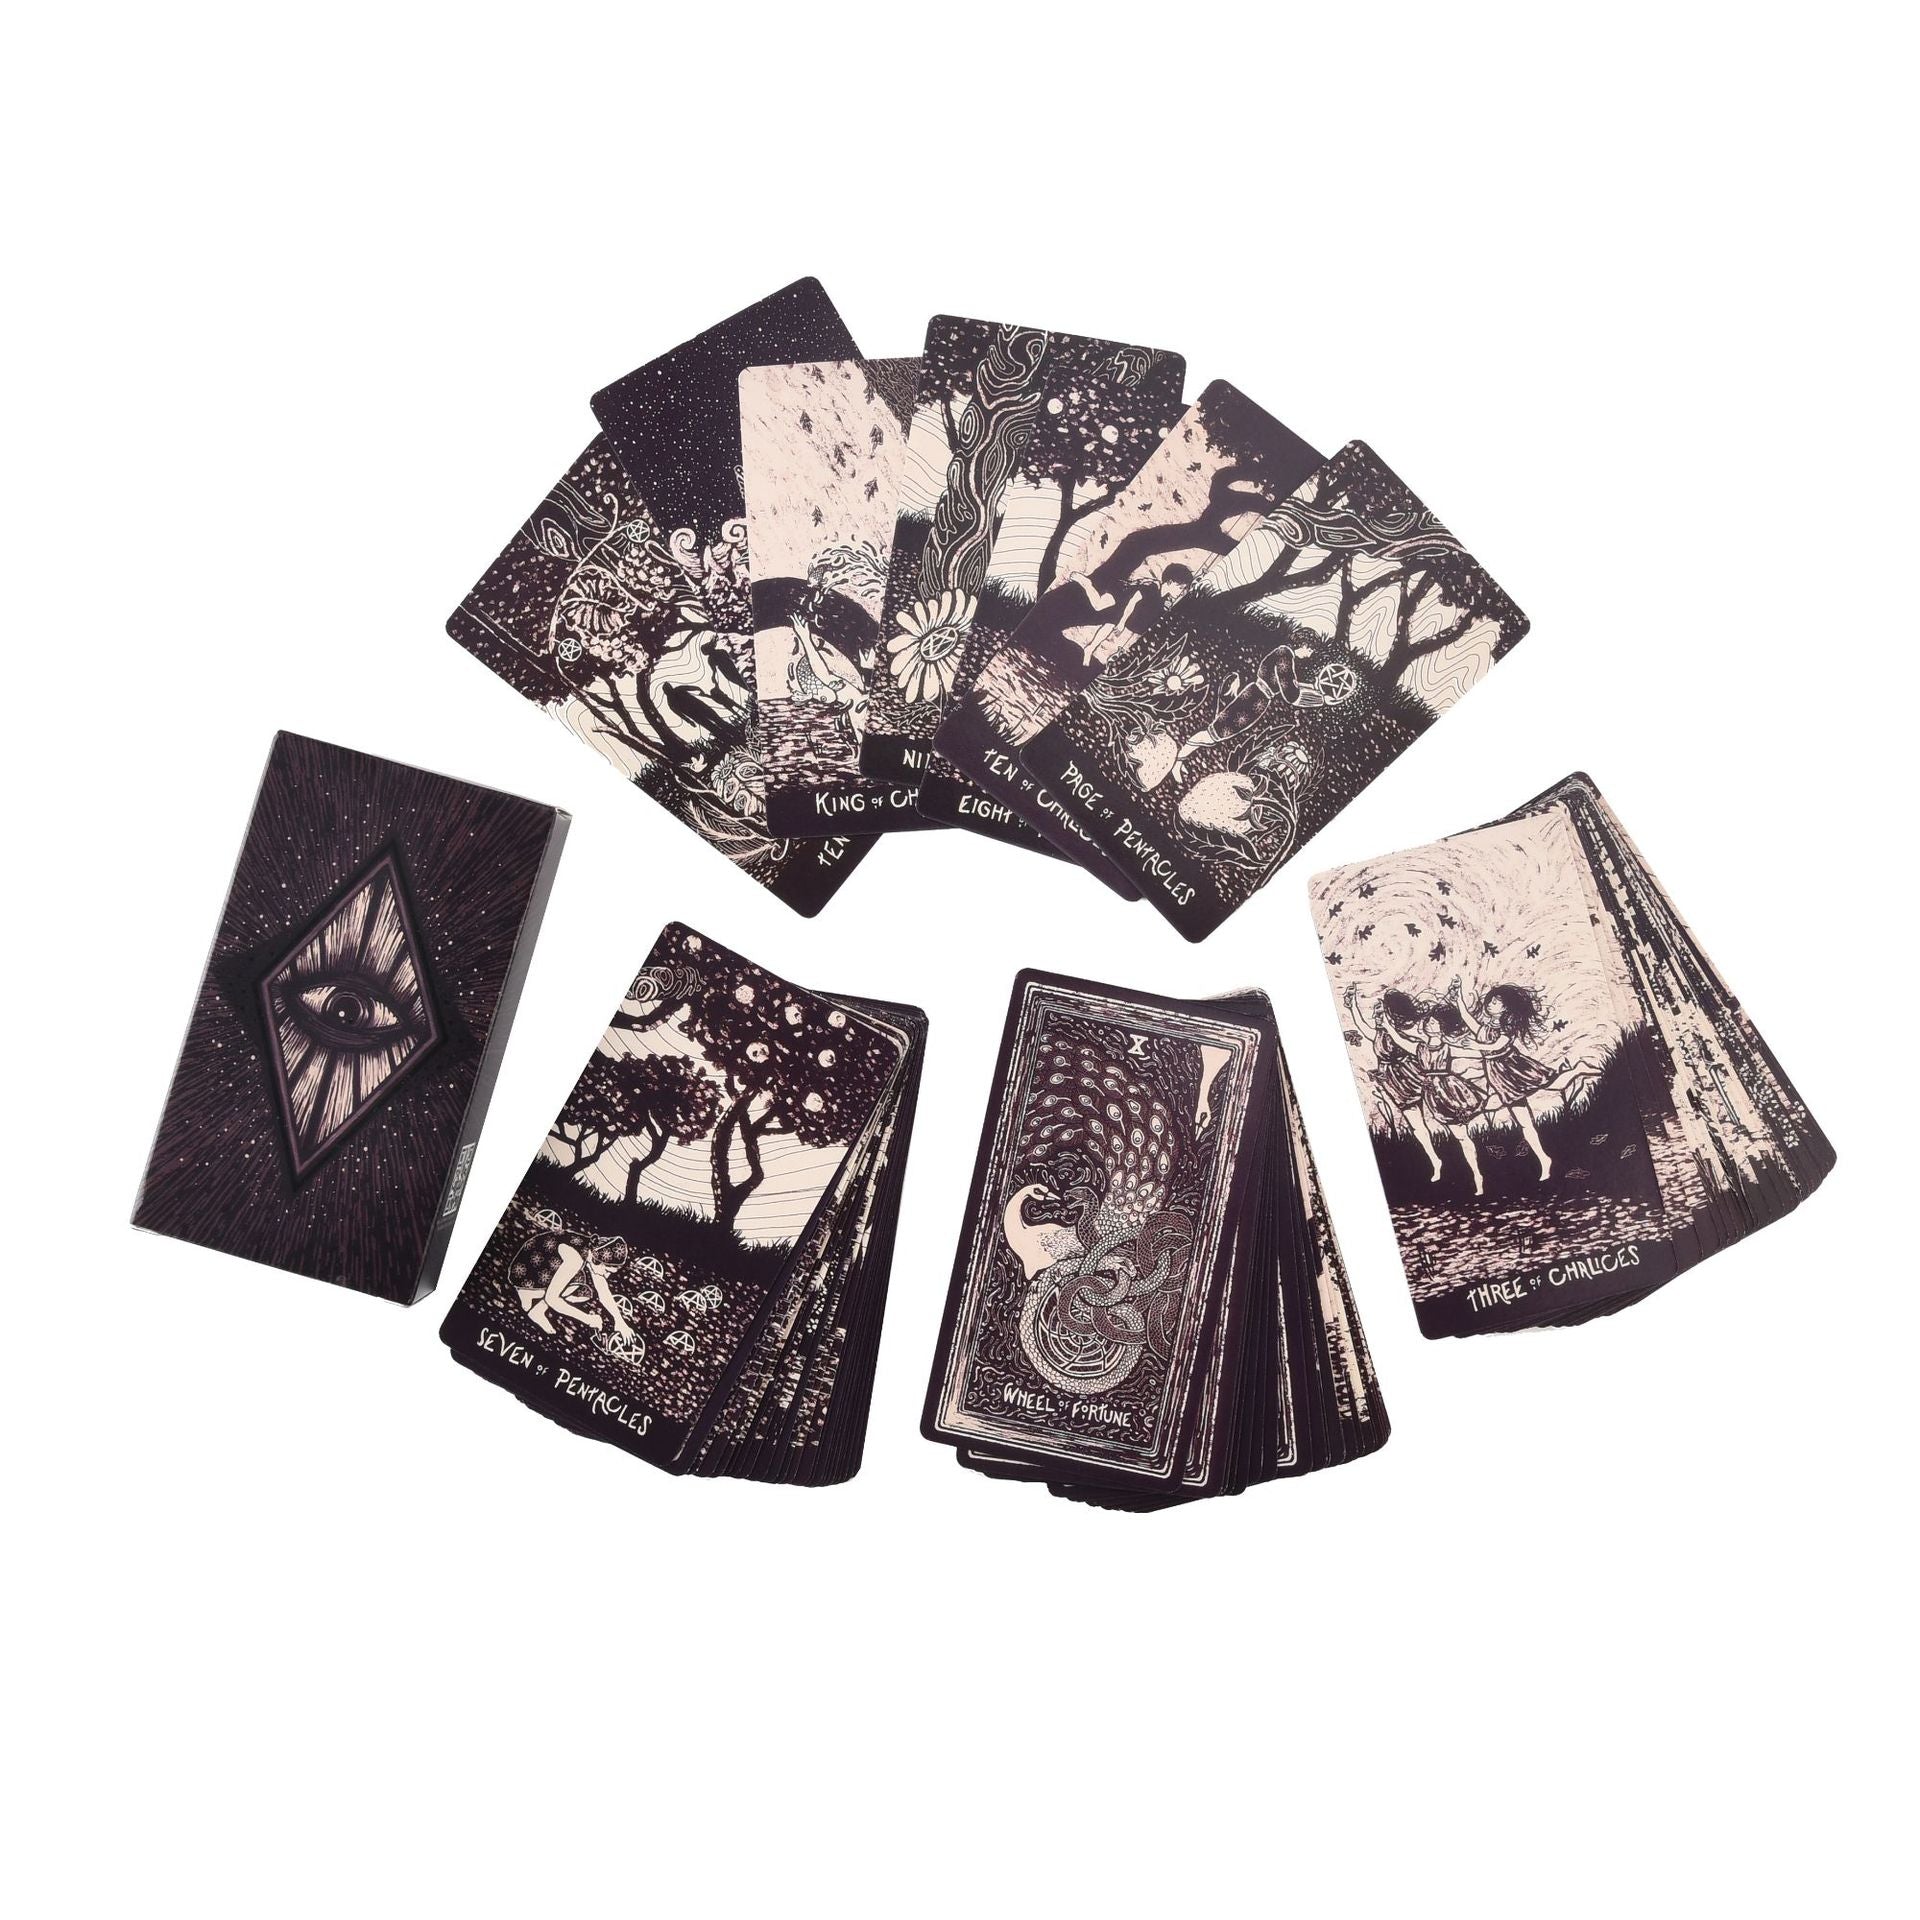 A box with an image of a Creative Black And White Version Of The Shining Tarot Card by Maramalive™ on it.